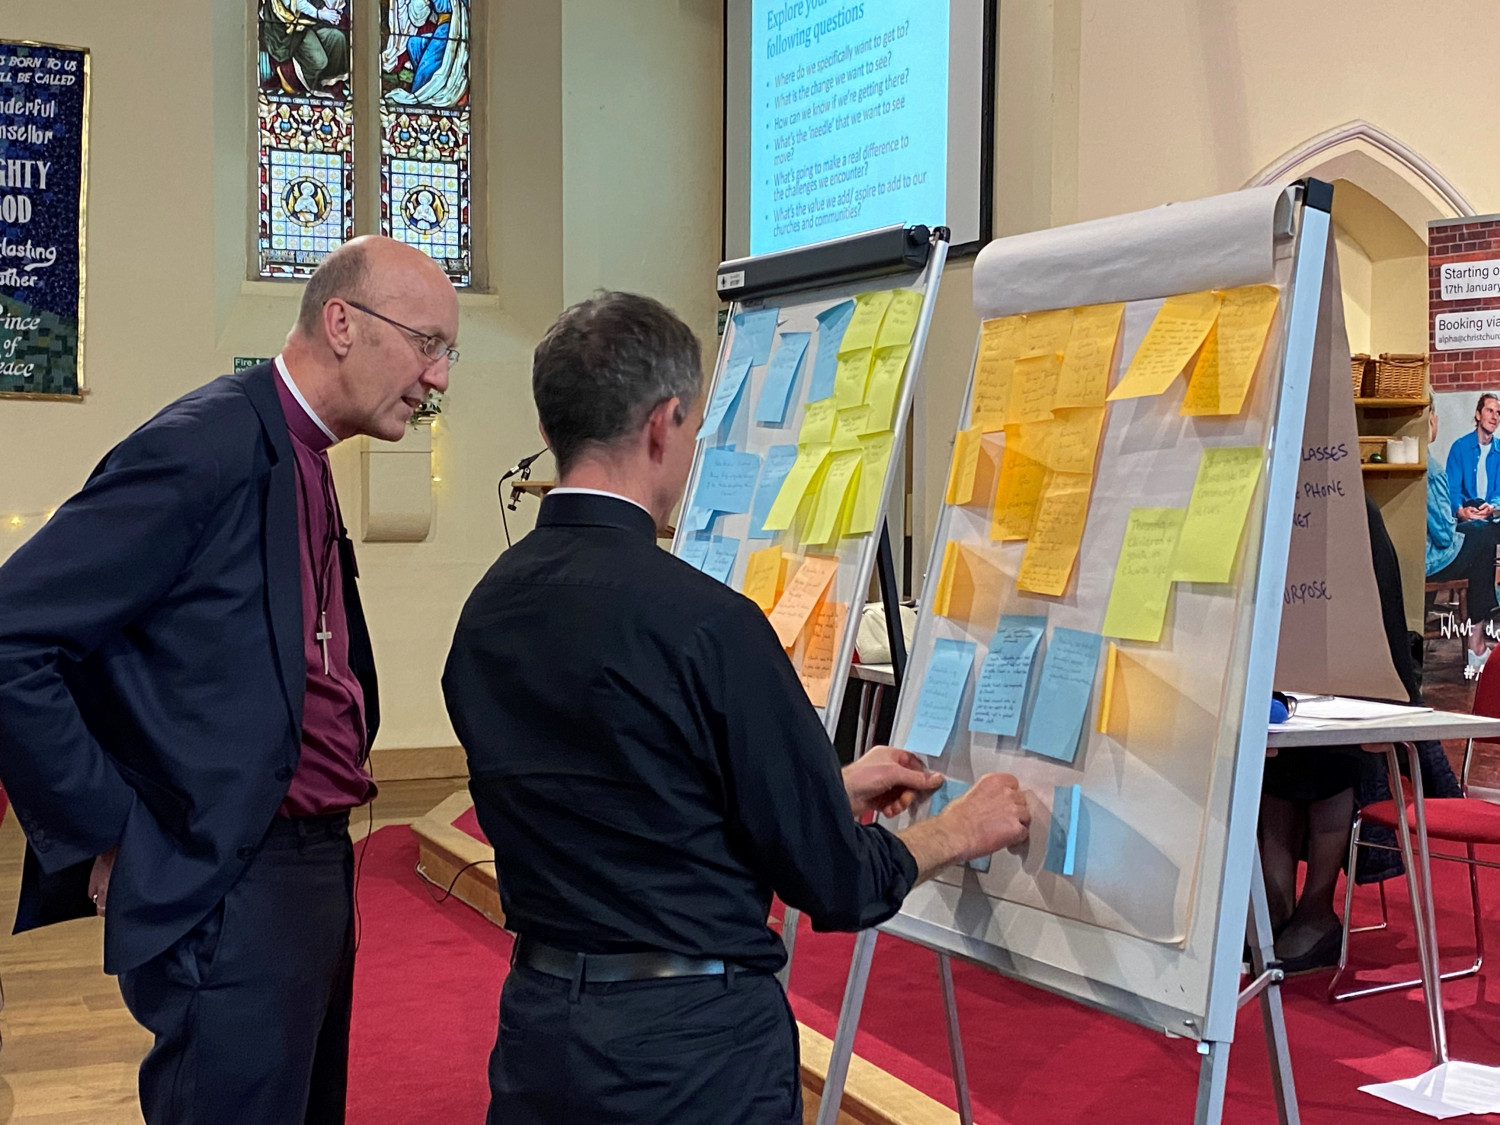 Bishop Michael and others reviewing strategy post its